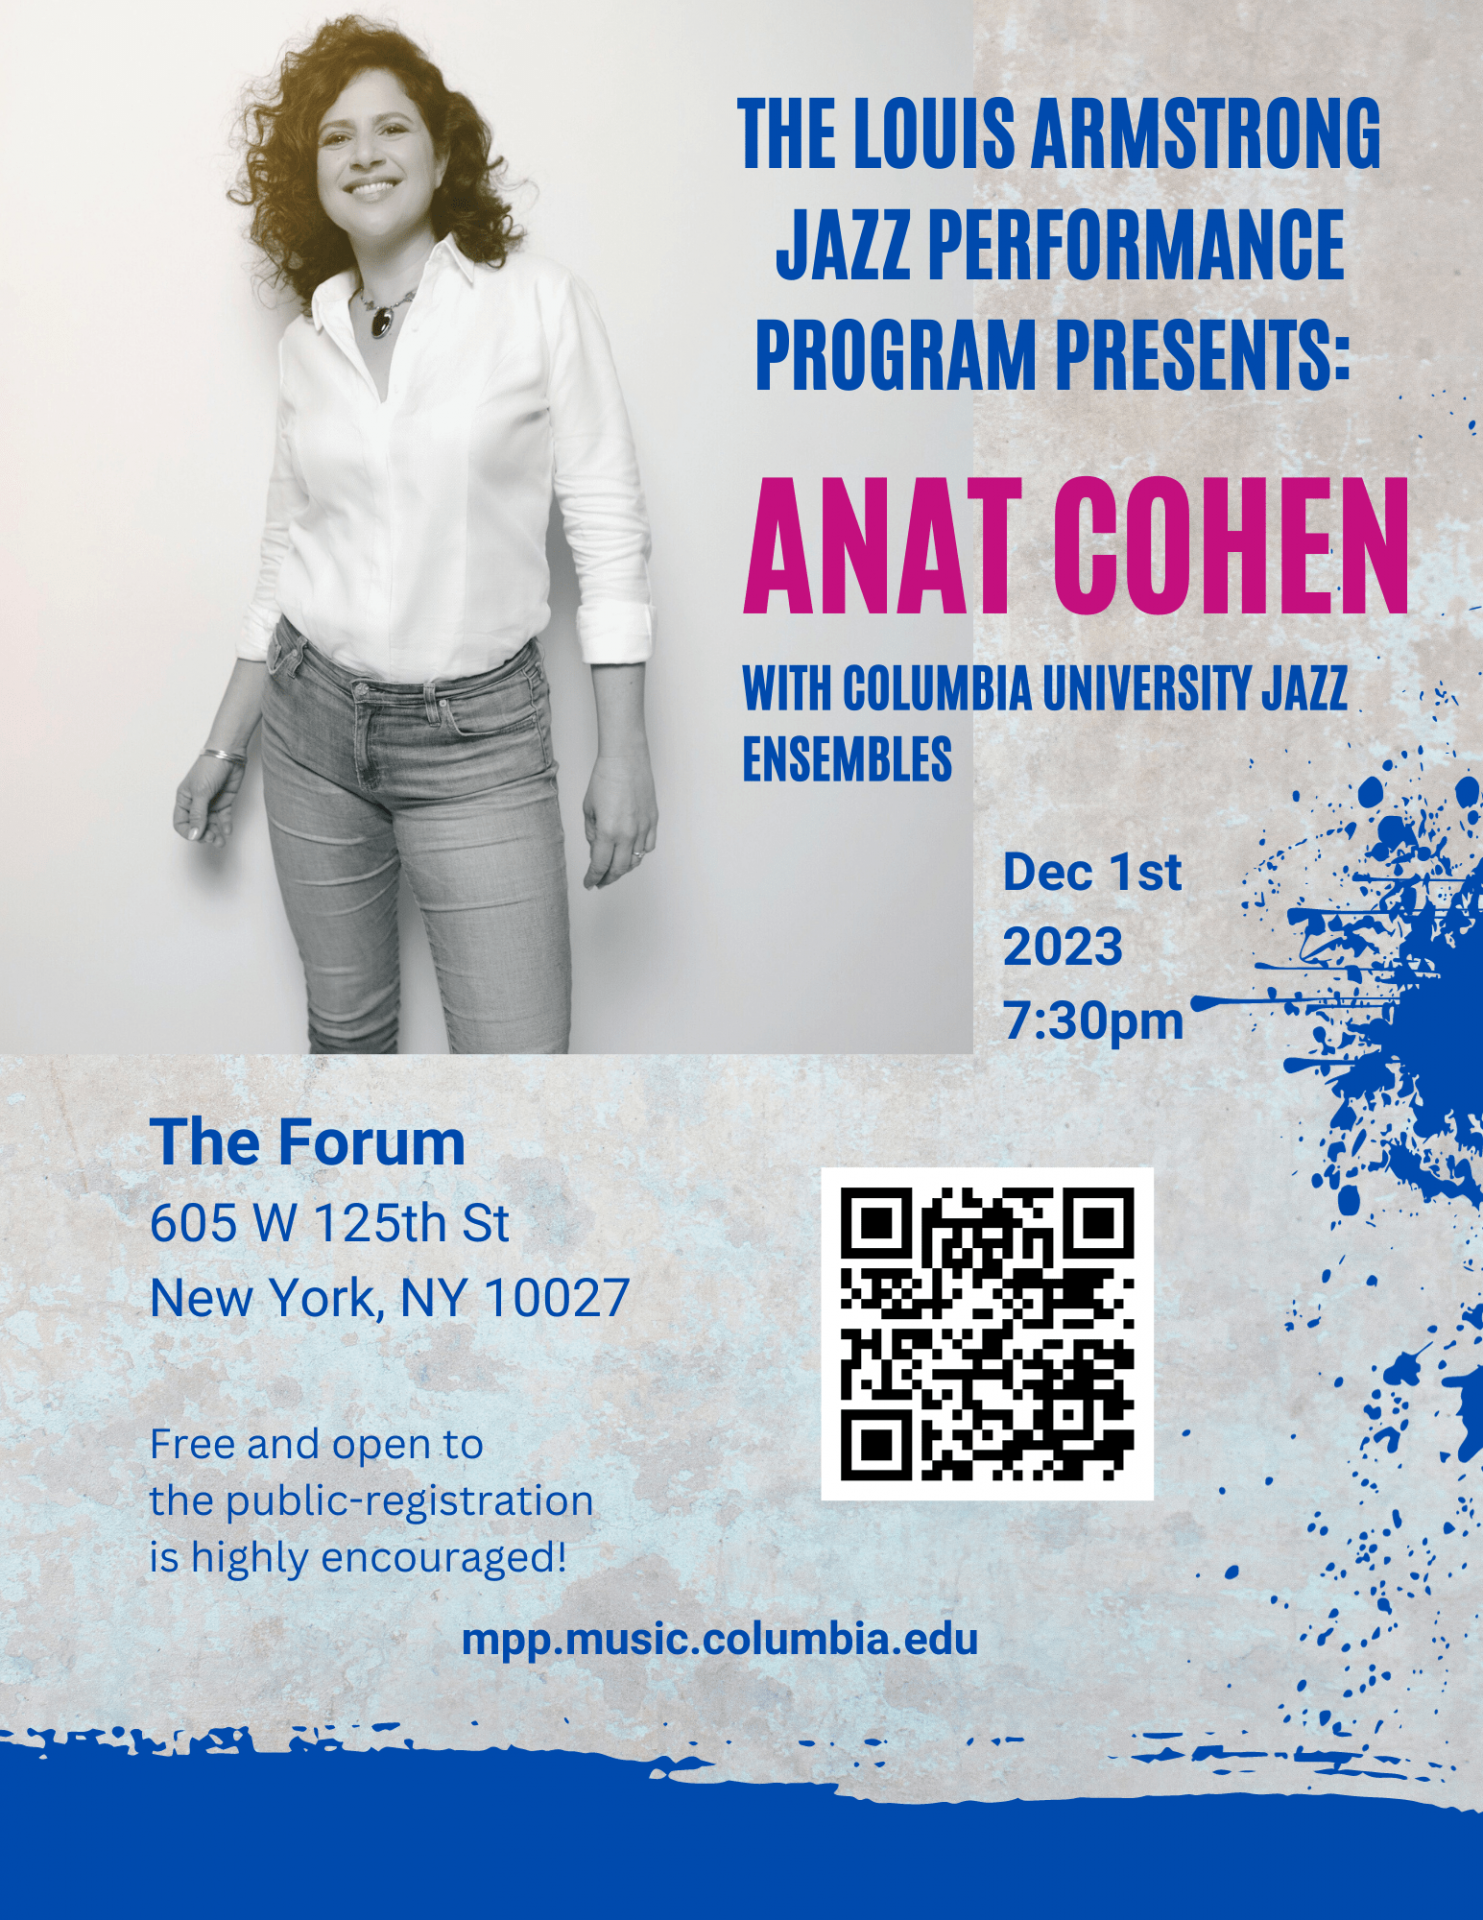 Flyer for Louis Armstrong Jazz Performance Program Anat Cohen with Columbia University Jazz Ensembles on 12/1/23 @ 7:30pm in the Forum at 605 W 125th Street that has a QR code for event registration link and a caption that says, "Free and open to the public — registration is highly encouraged!" Photo of Anat Cohen.